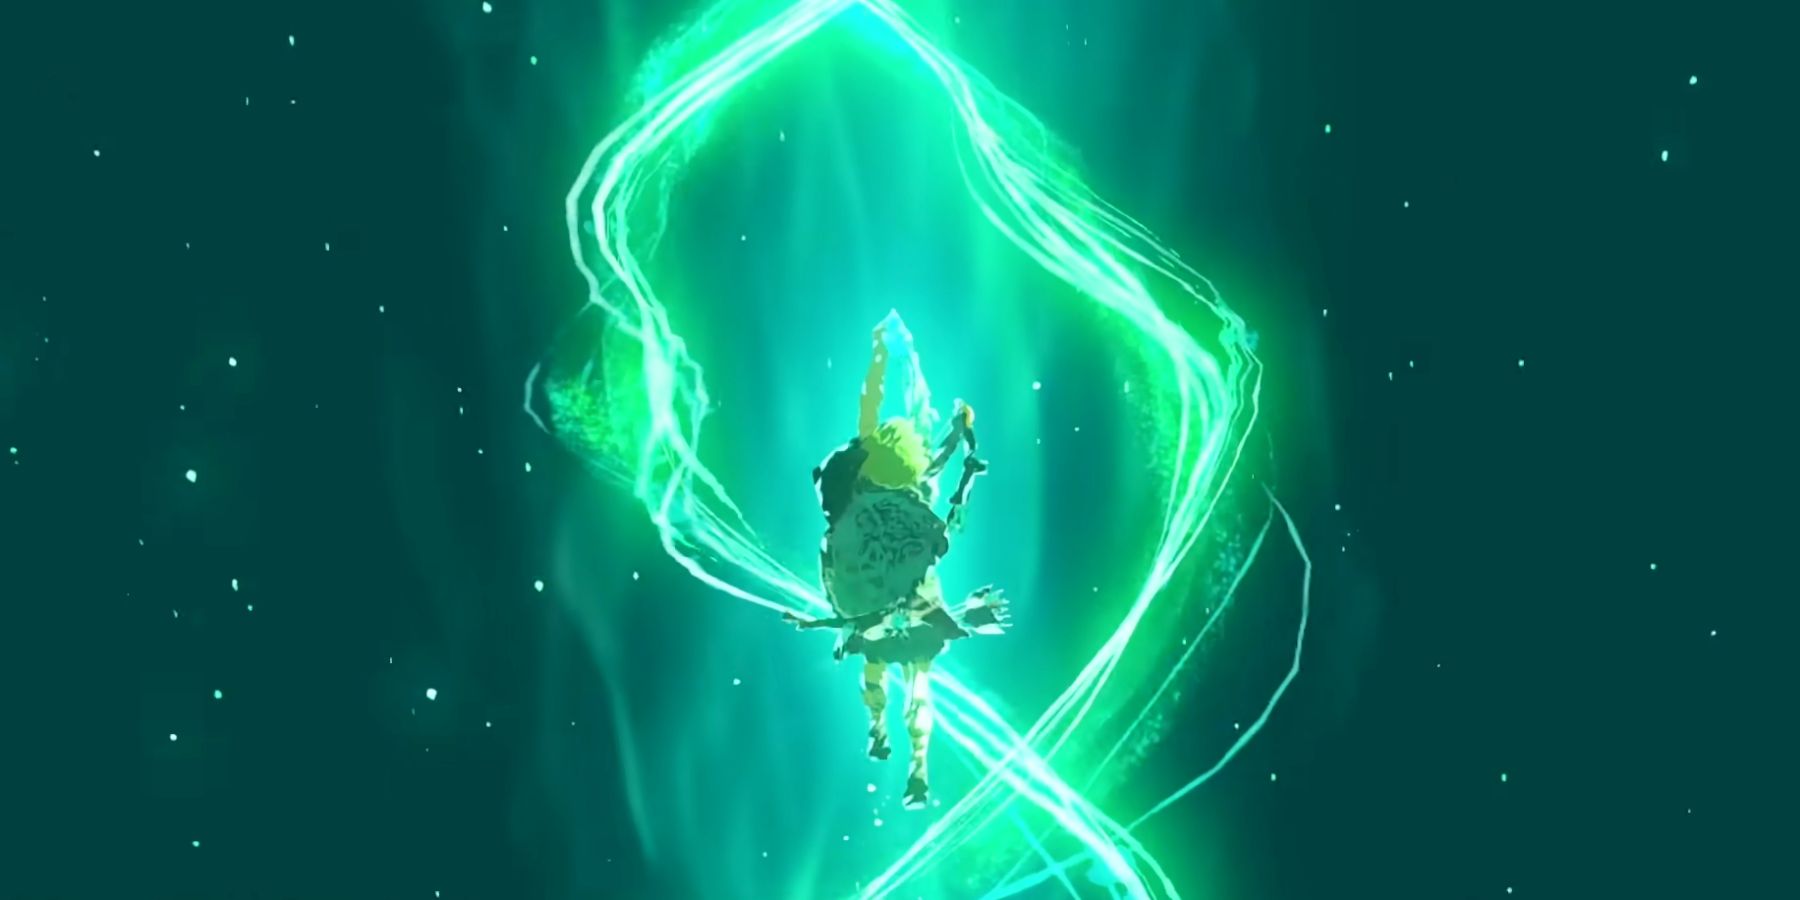 Link using the upward ability in Kingdom's Tears to pass through the solid ground.